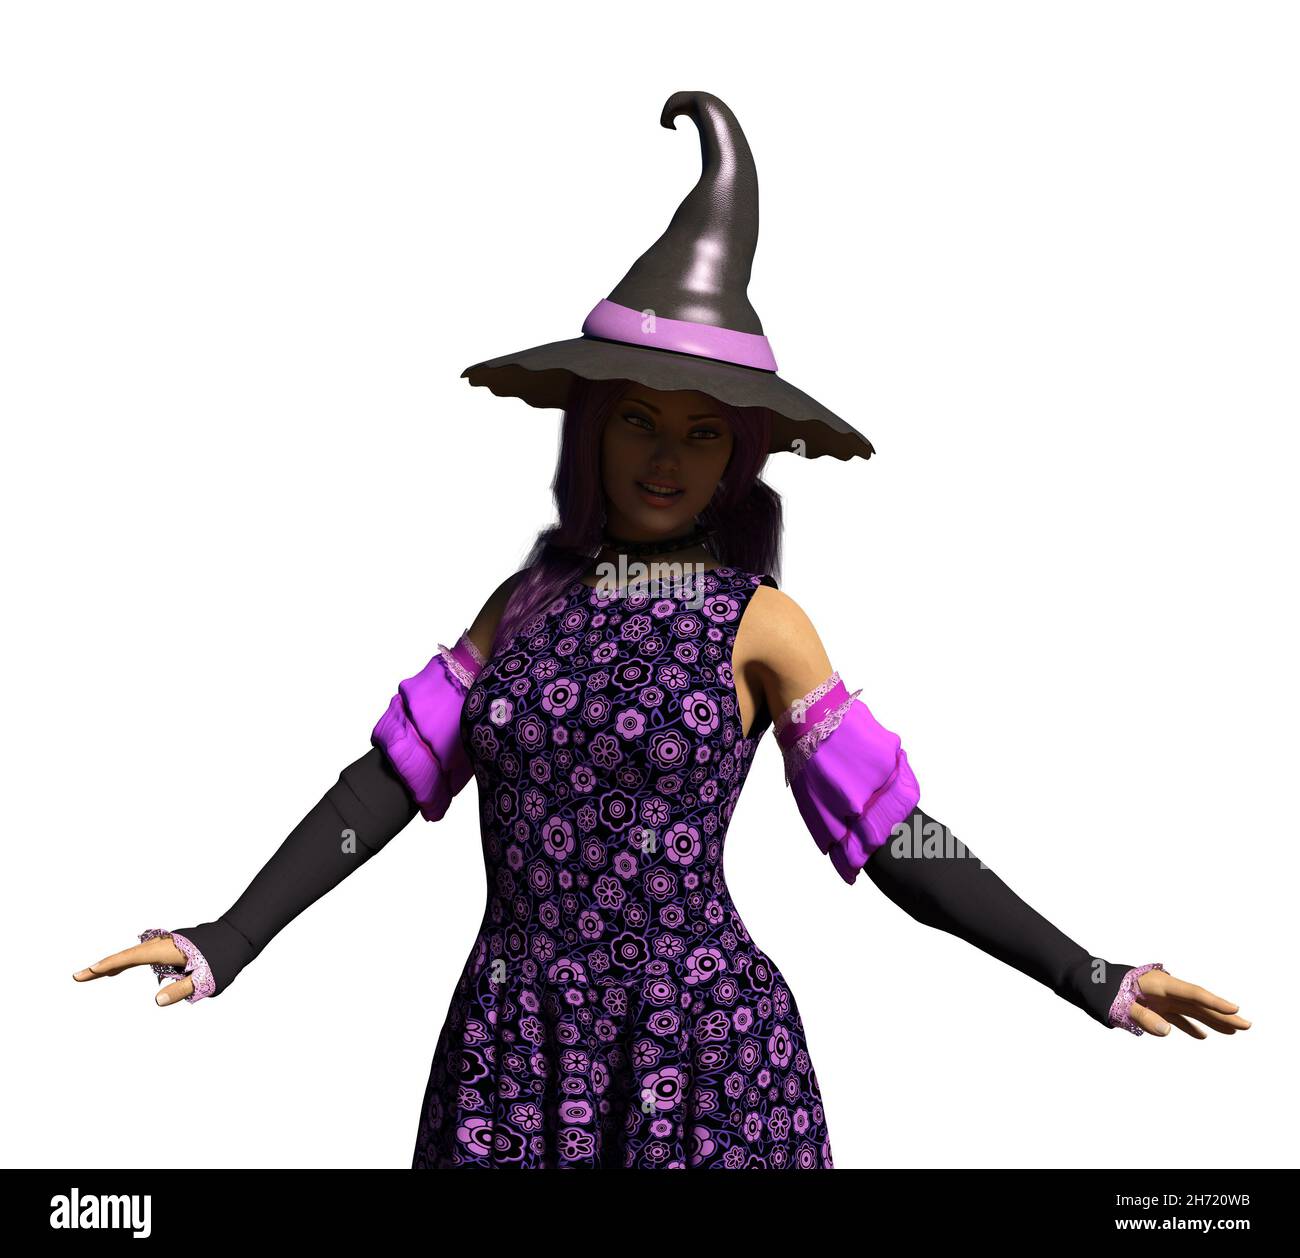 Digitally rendered woman with purple hair and eyes in witch hat ready for Halloween, 3d illustration. Stock Photo